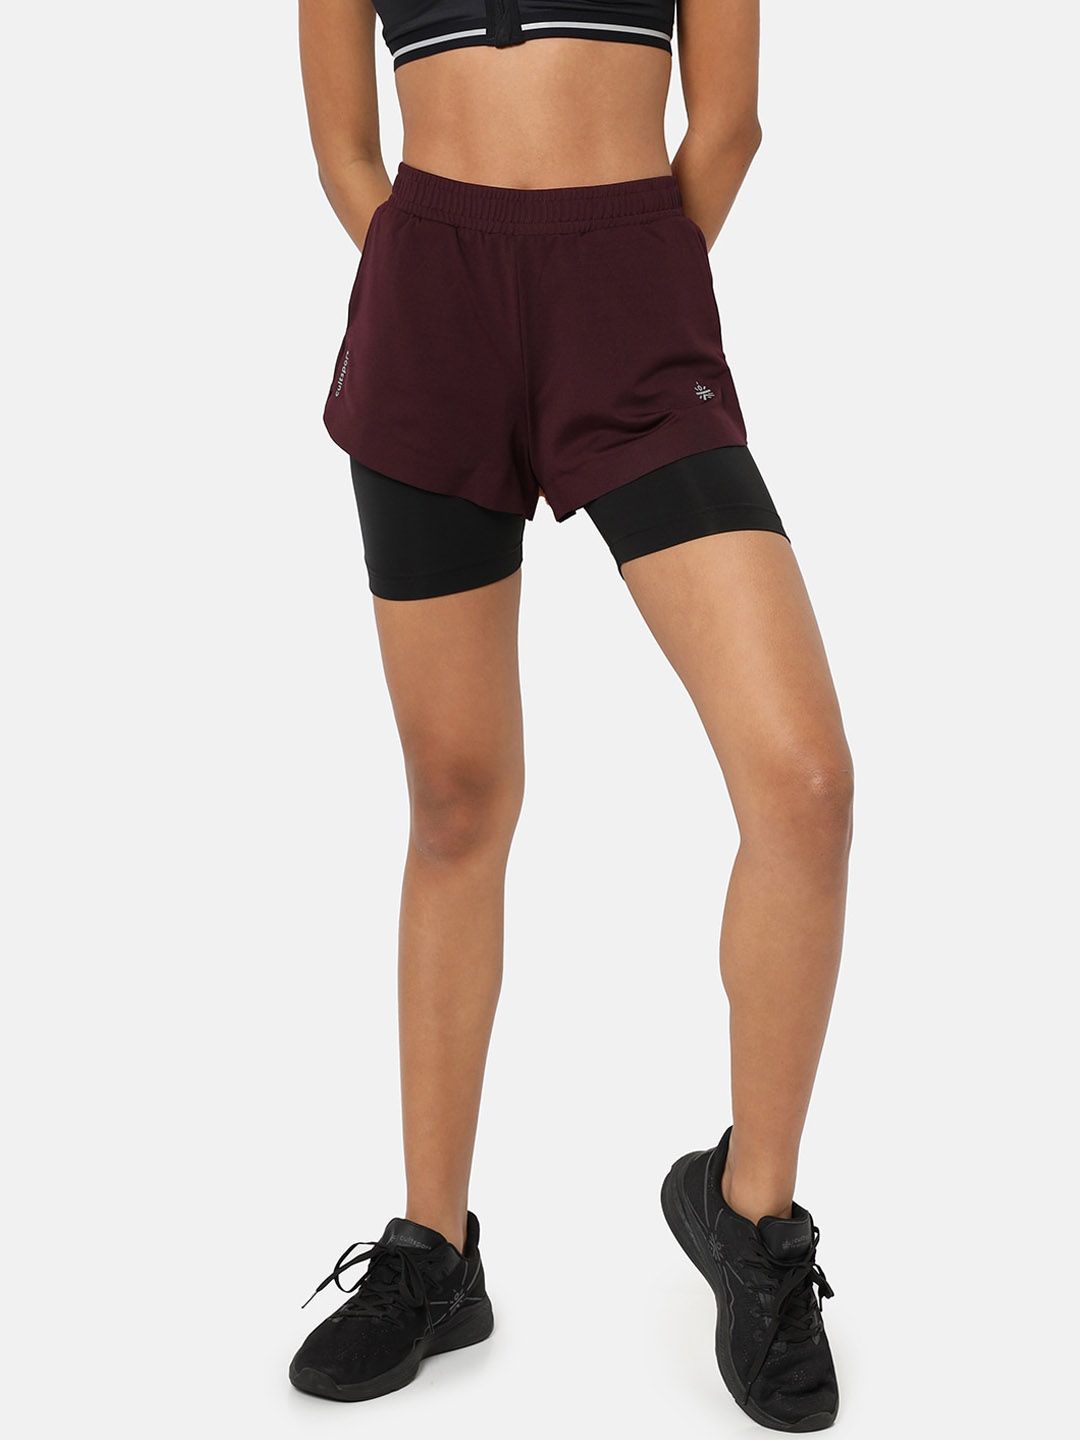 Cultsport Women Burgundy High-Rise Training or Gym Sports Shorts With Inner Tights Price in India